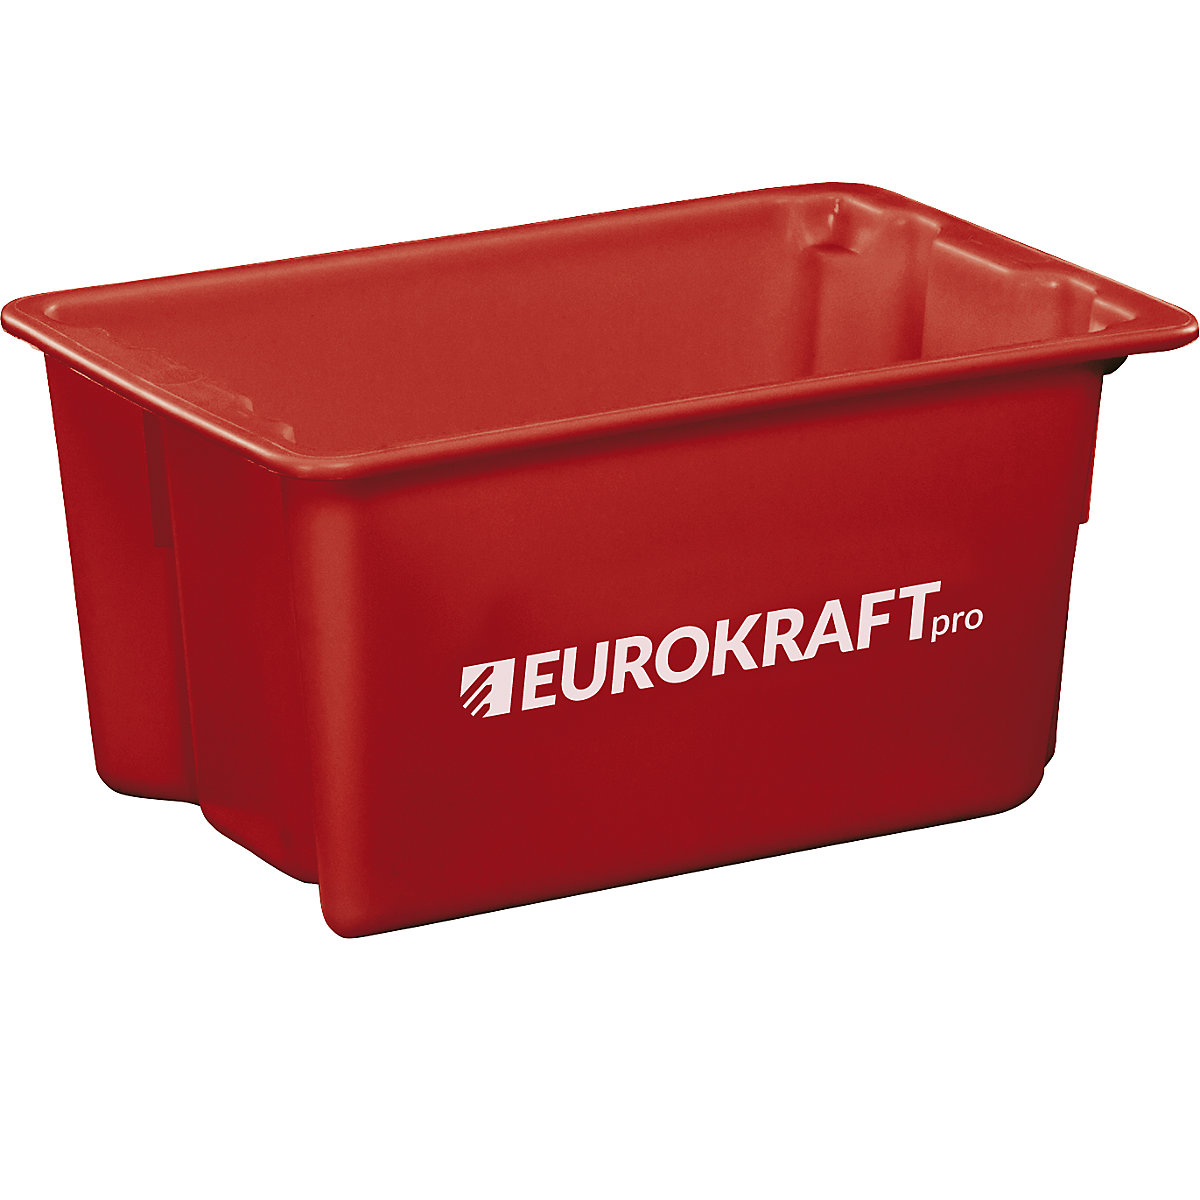 Stack/nest container made of polypropylene suitable for foodstuffs – eurokraft pro, 50 l capacity, pack of 3, solid walls and base, red